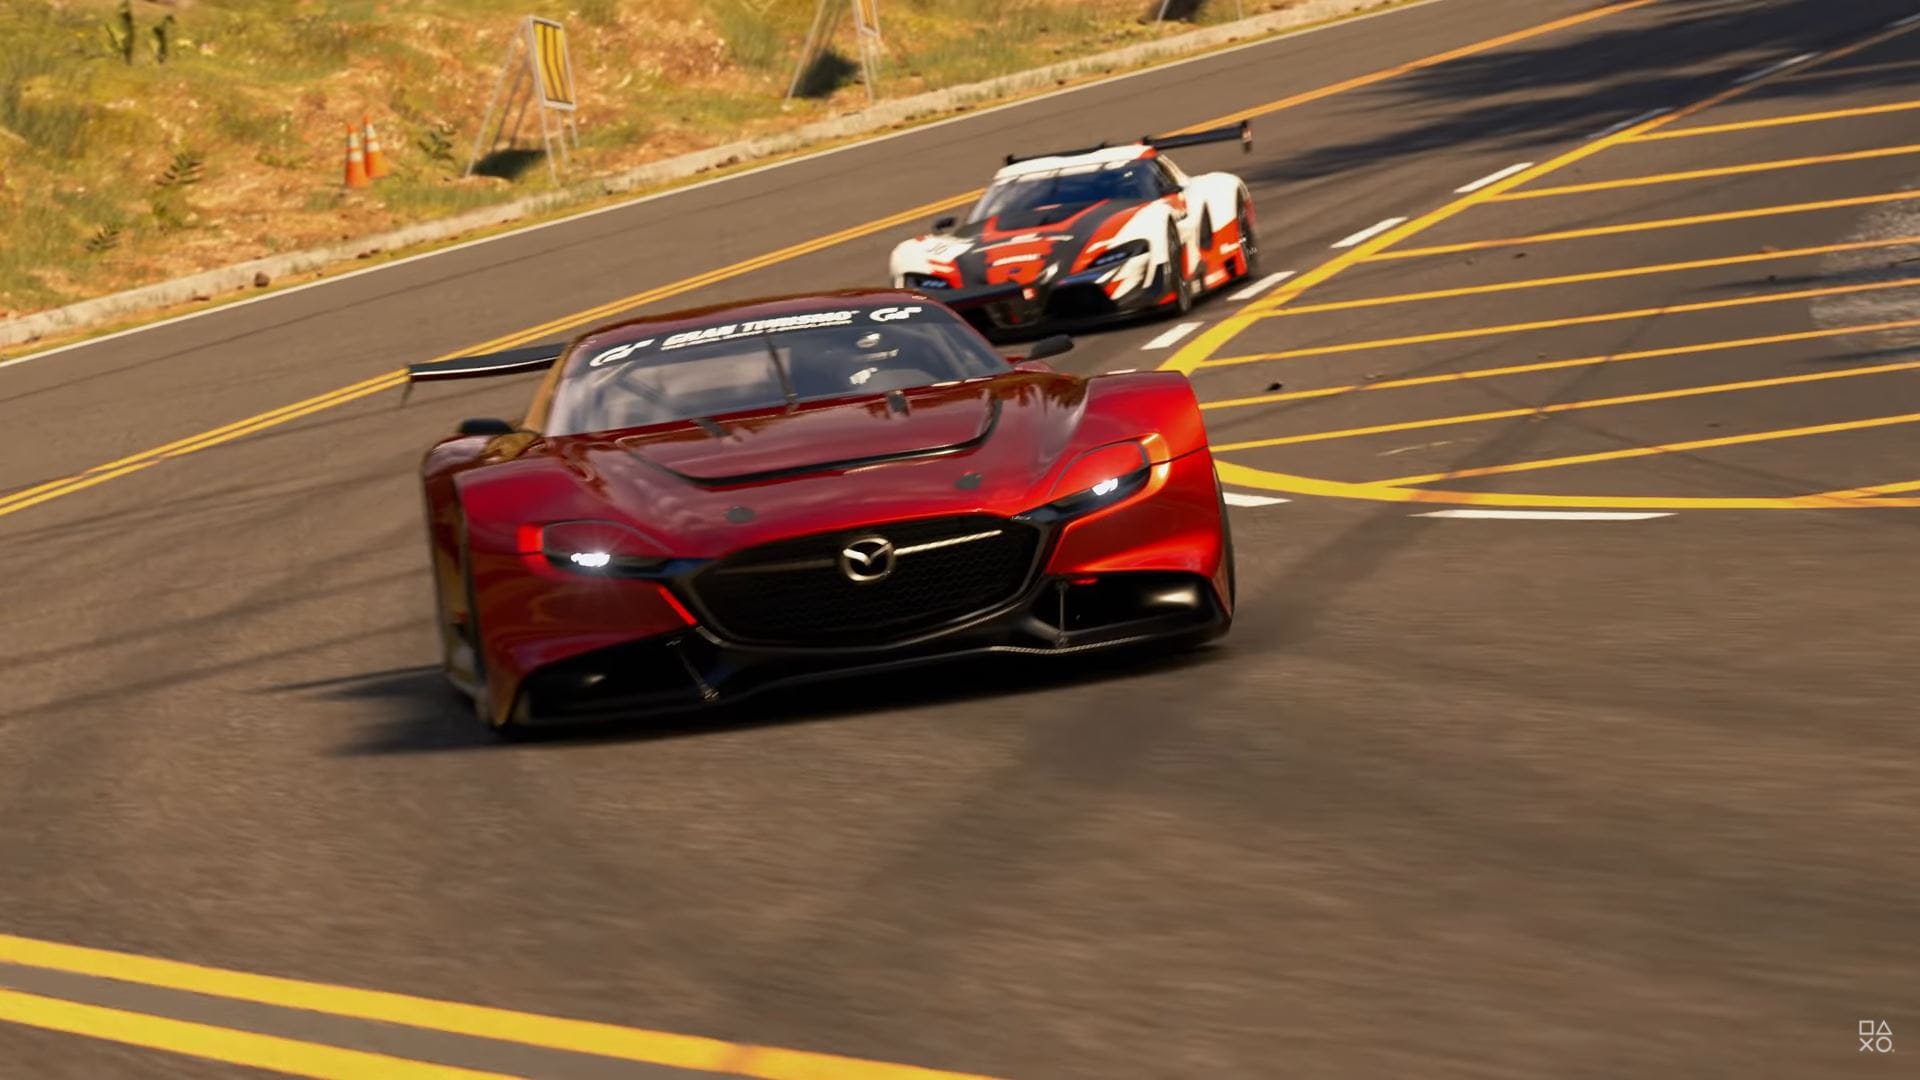 A car zooming around a track in Gran Turismo 7